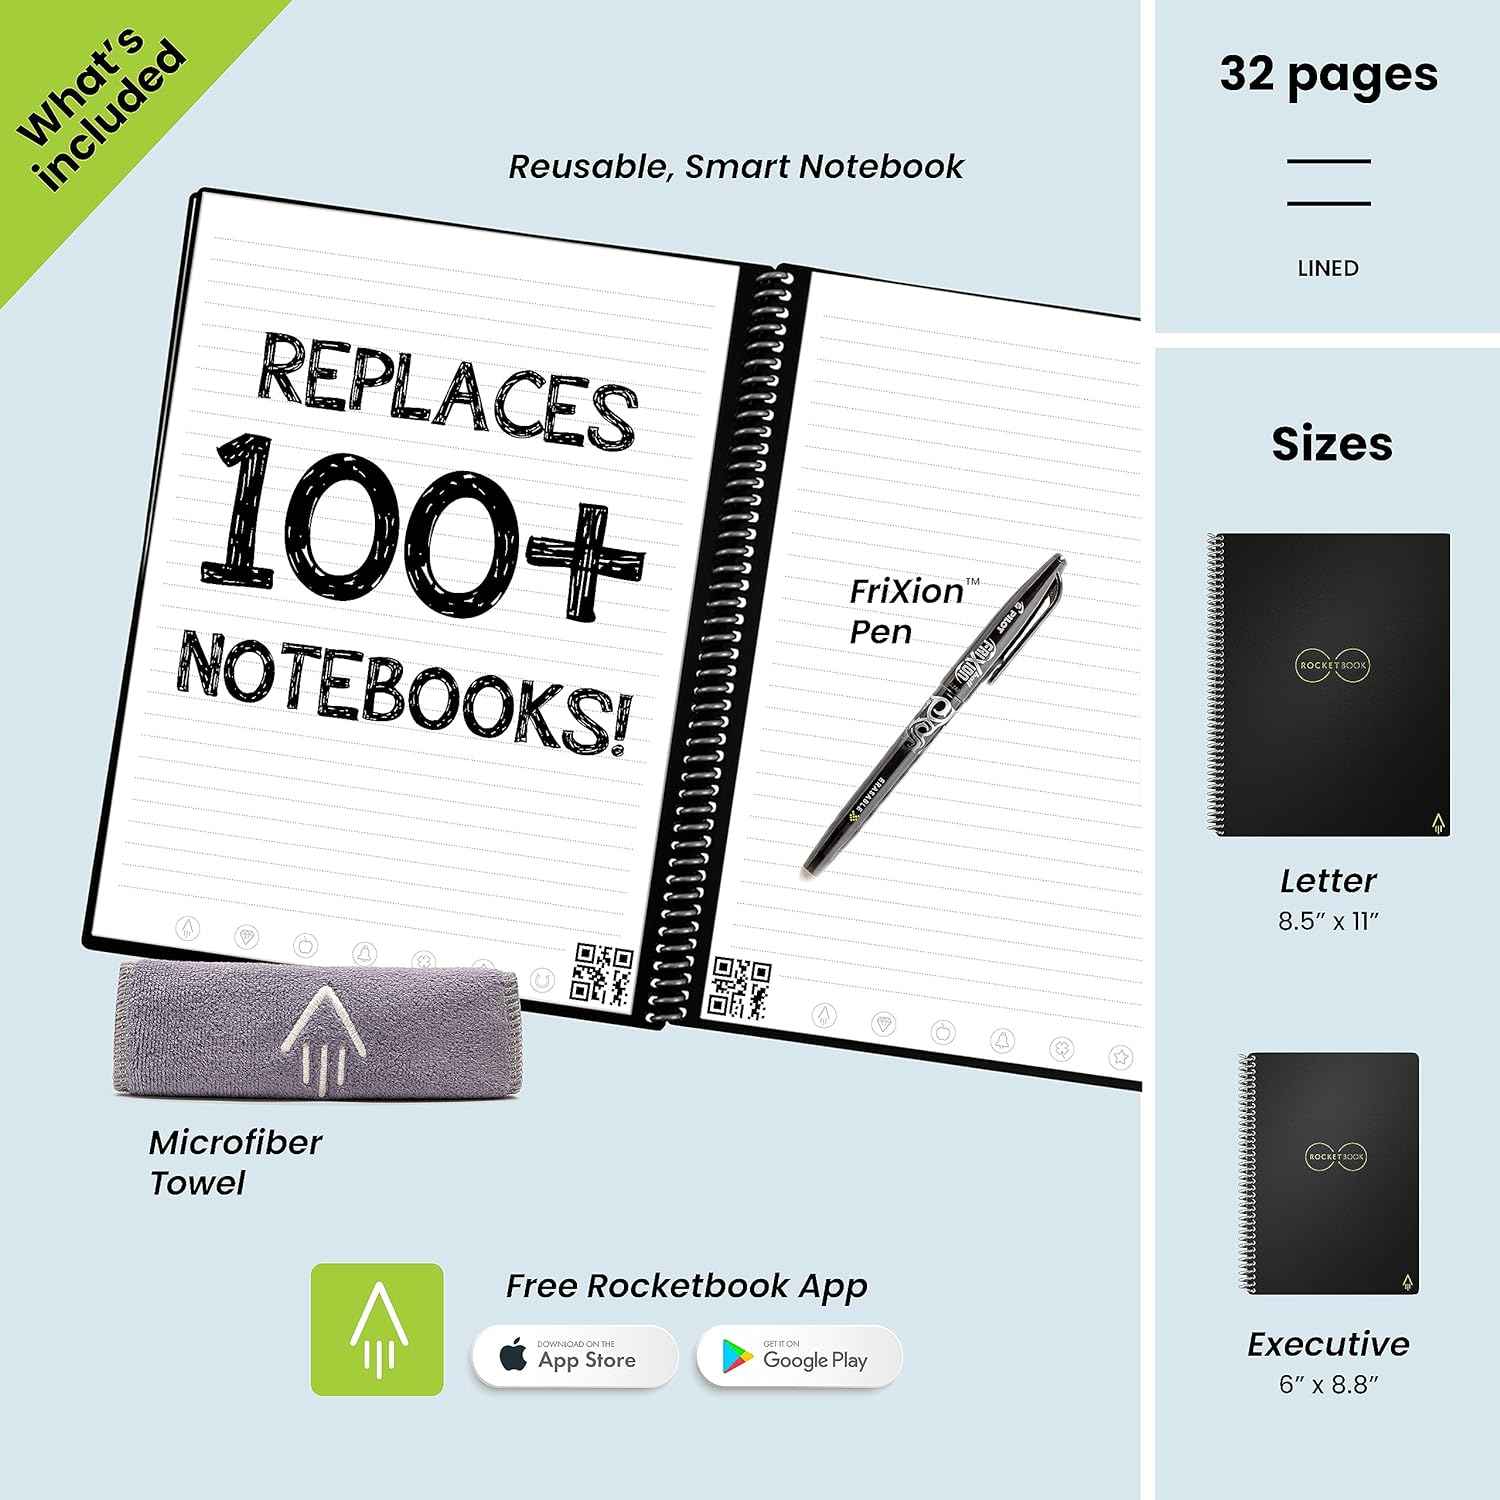 Rocketbook Core Reusable Smart Notebook | Innovative, Eco-Friendly, Digitally Connected Notebook with Cloud Sharing Capabilities | Lined, 8.5 x 11, 36 Pg, Infinity Black